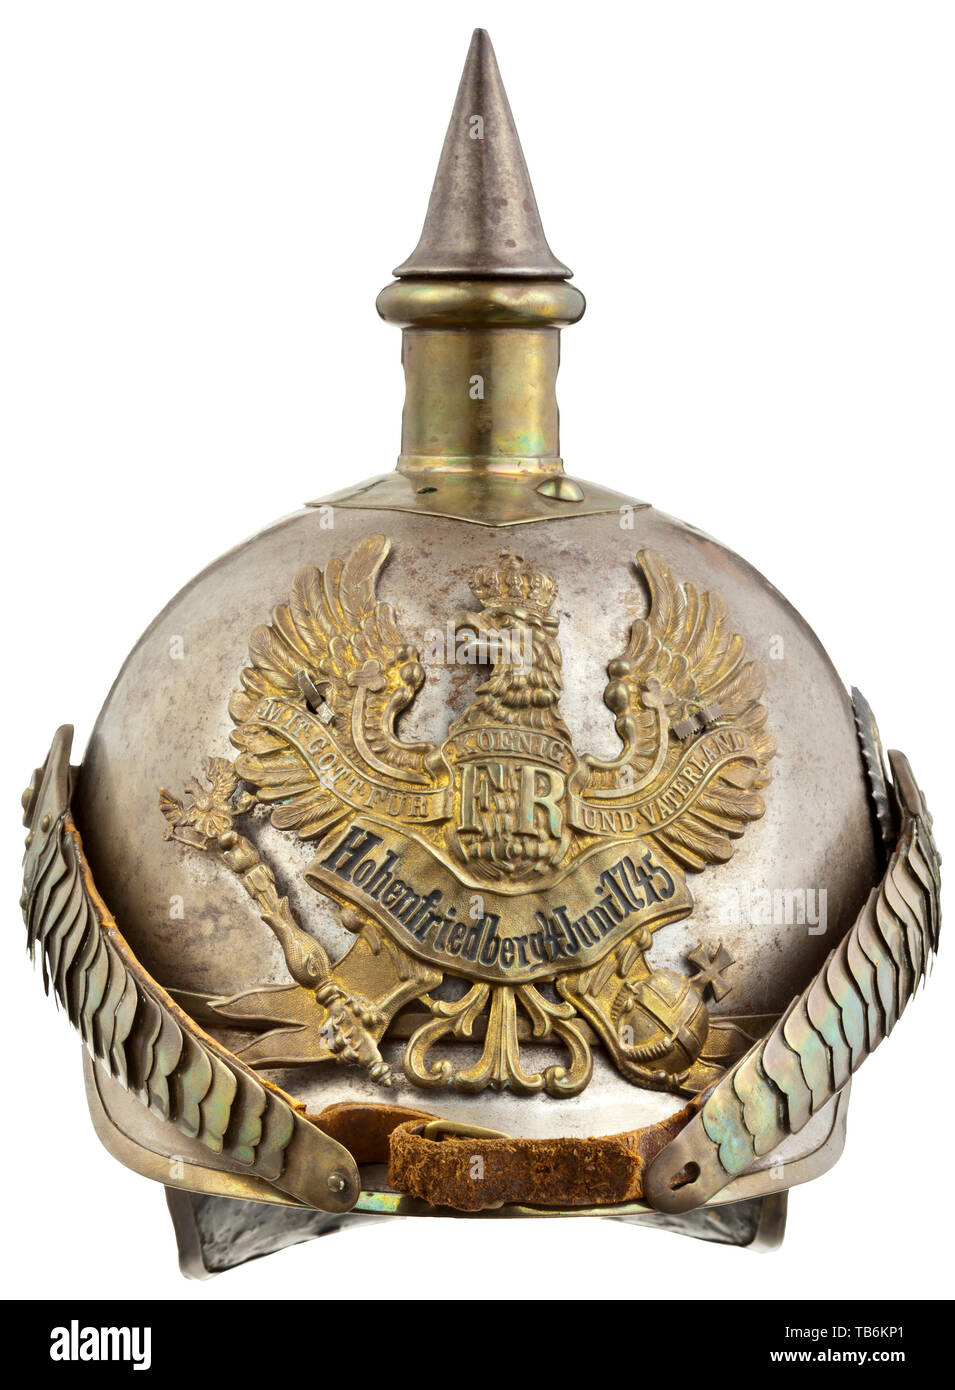 A helmet M 1894 for enlisted men in the Königin Cuirassier Regiment (Pomeranian) no. 2 Hohenfriedberg, Nickel plated iron skull, humped rivets, oval base plate with removable iron spike, helmet emblem with bandeau 'Hohenfriedberg 4 Juni 1745'. Convex chin scales with M 91 button, Reich cockade. Leather helmet liner. Heavy signs of age, a few defective pieces and damage, probably a converted older helmet. Easy to improve with expert restoration. Prussian, Prussia, German, Germany, militaria, military, object, objects, stills, clipping, clippings, , Additional-Rights-Clearance-Info-Not-Available Stock Photo